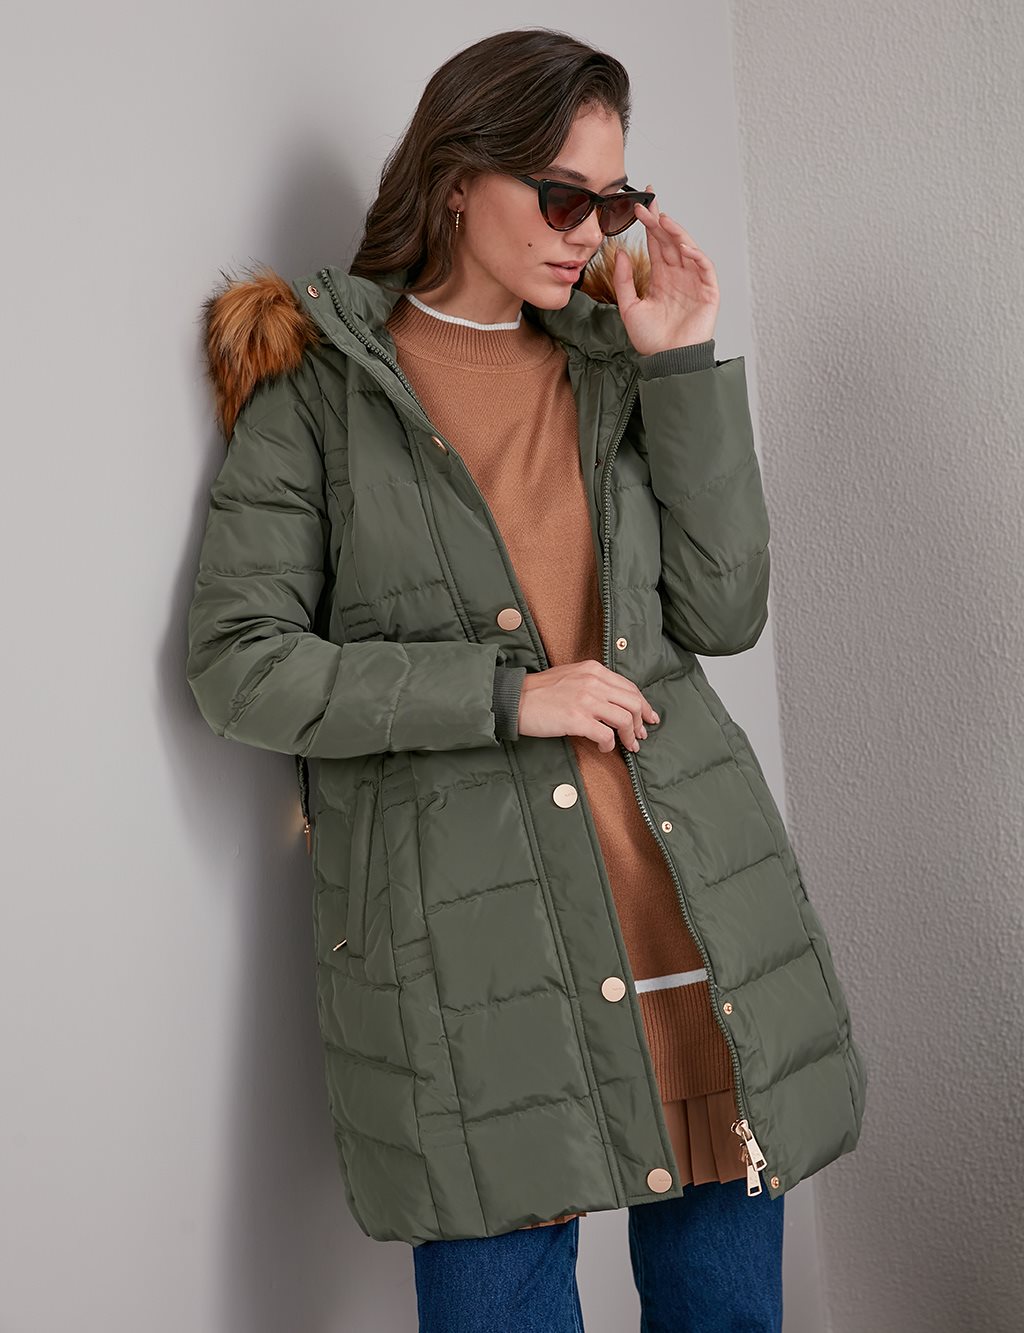 Quilted, Hooded Goose Down Coat A20 27006 Khaki - Kayra.com